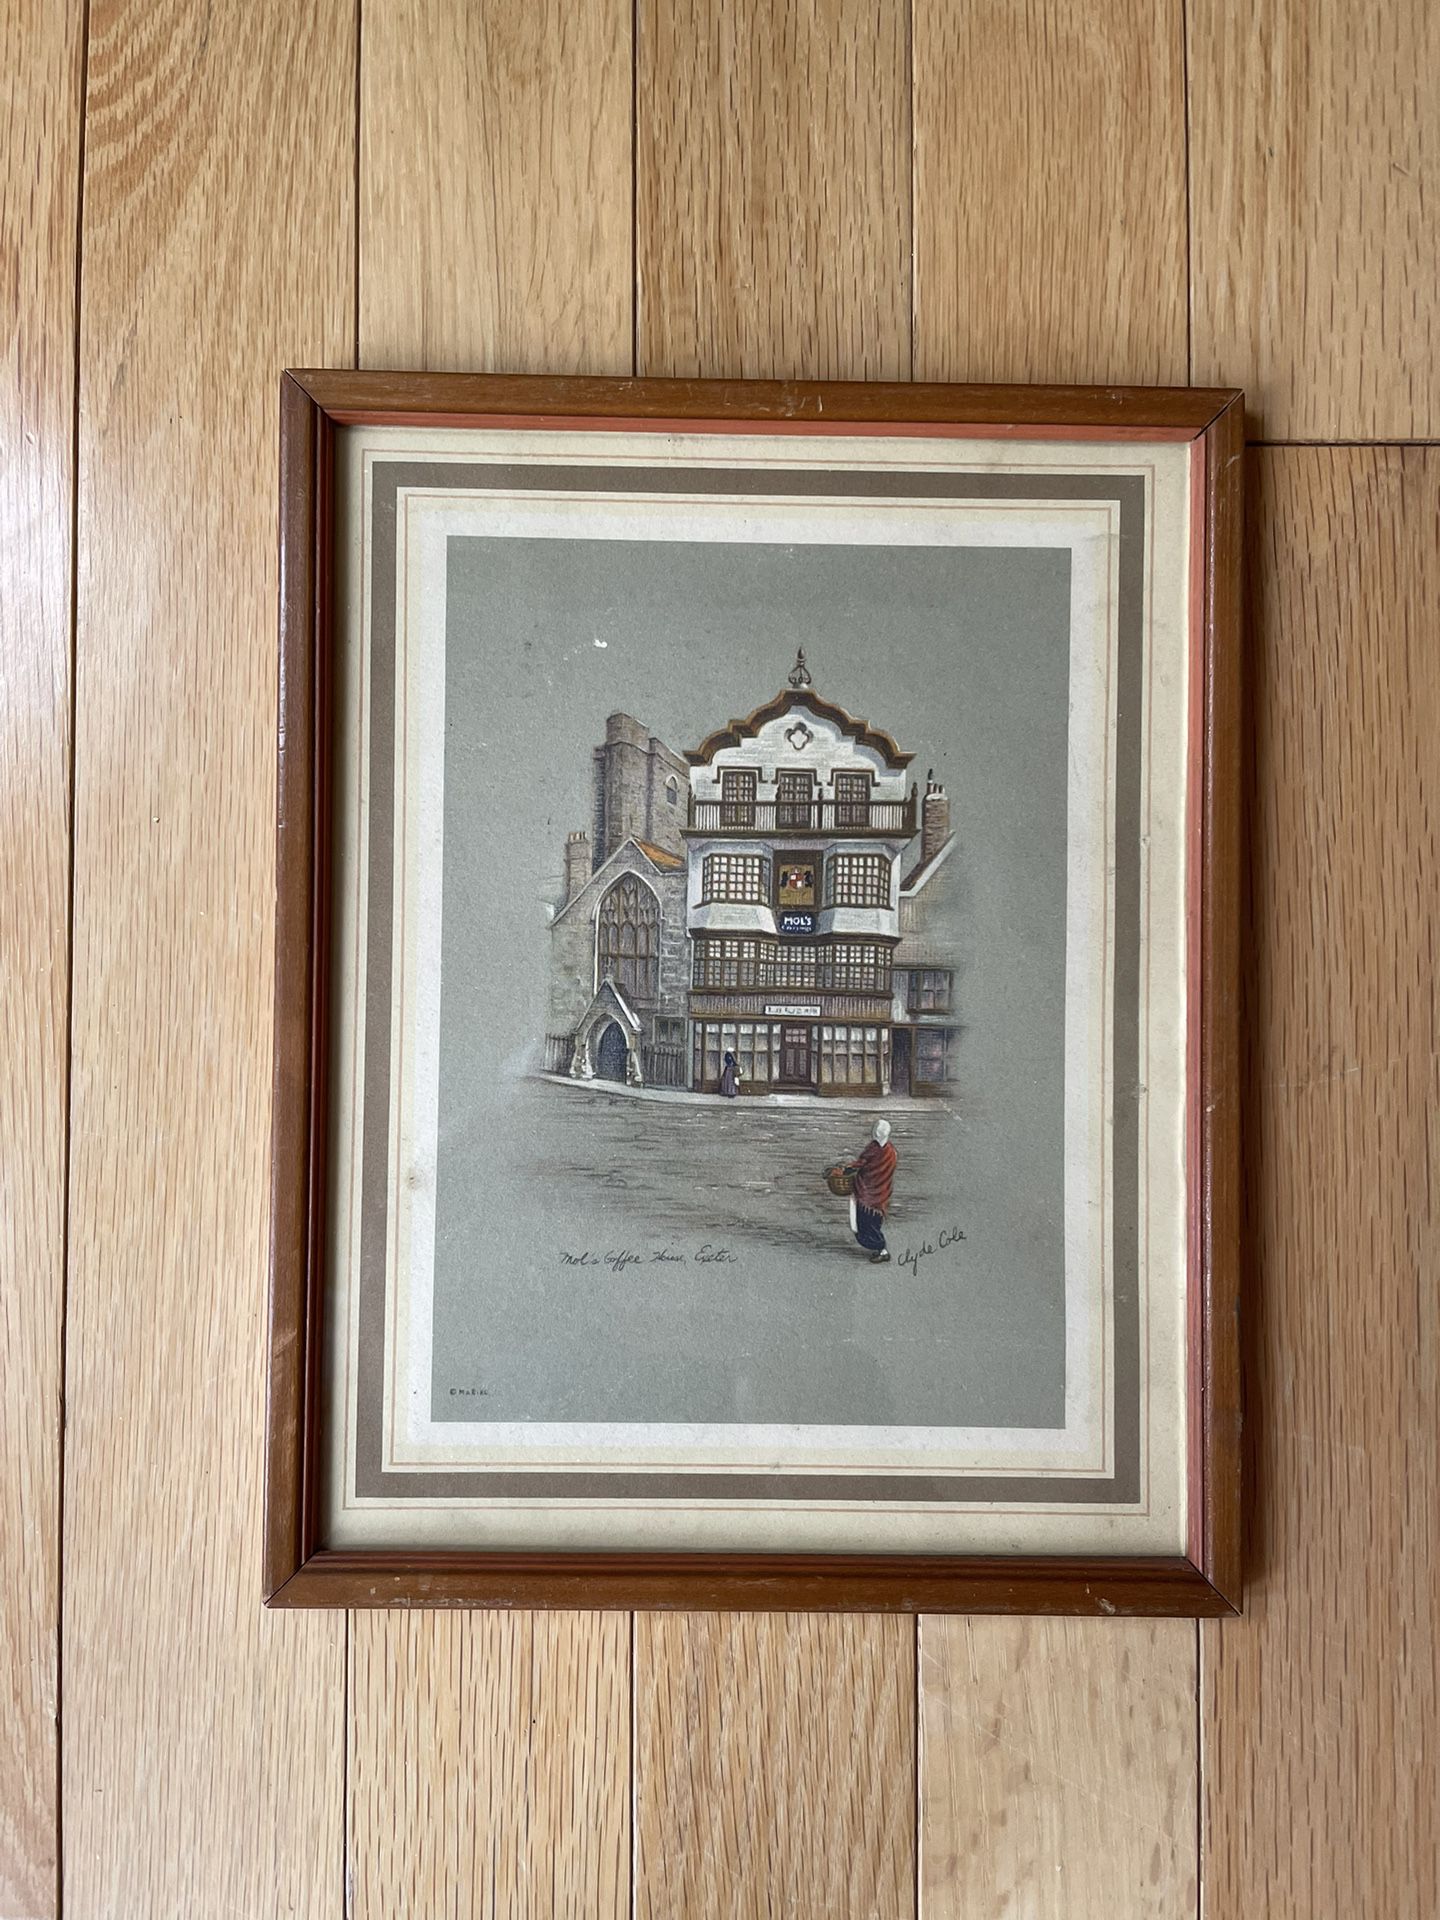 Vintage 1940’s Clyde Cole Signed Framed Print Mold Coffee House Exter England 7.5x9.5